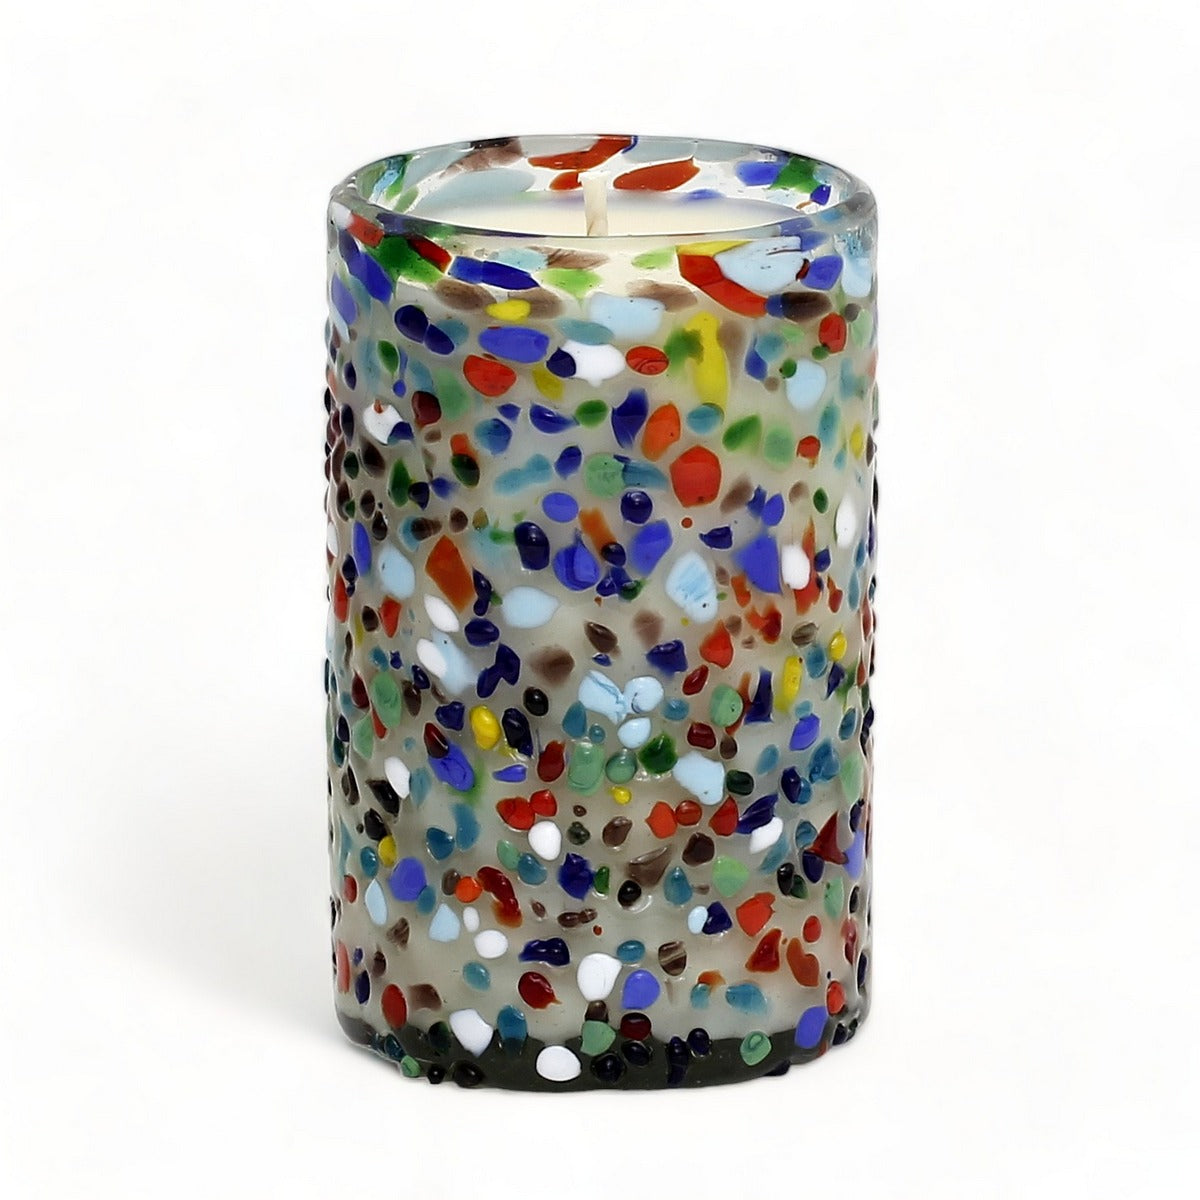 HOLIDAYS MURANO CANDLE: Murano Confetti Style Glass Tall Tumbler (14 Oz.) - SET of TWO